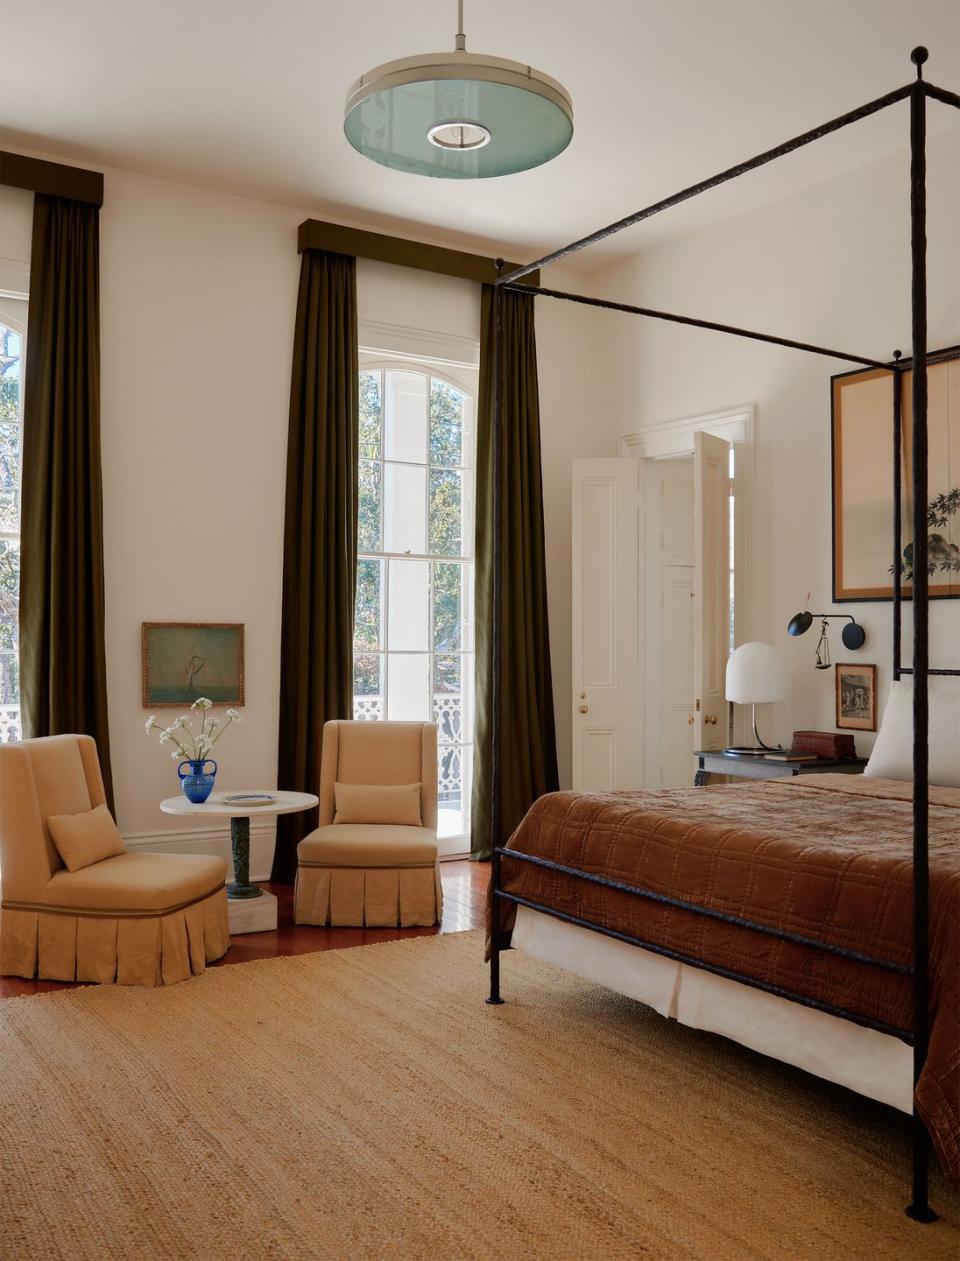 a four poster wrought iron bed has a chestnut brown cover, two armless chairs upholstered in linen with a round marble top side table between them, windows with deep green linen curtains, braided jute rug